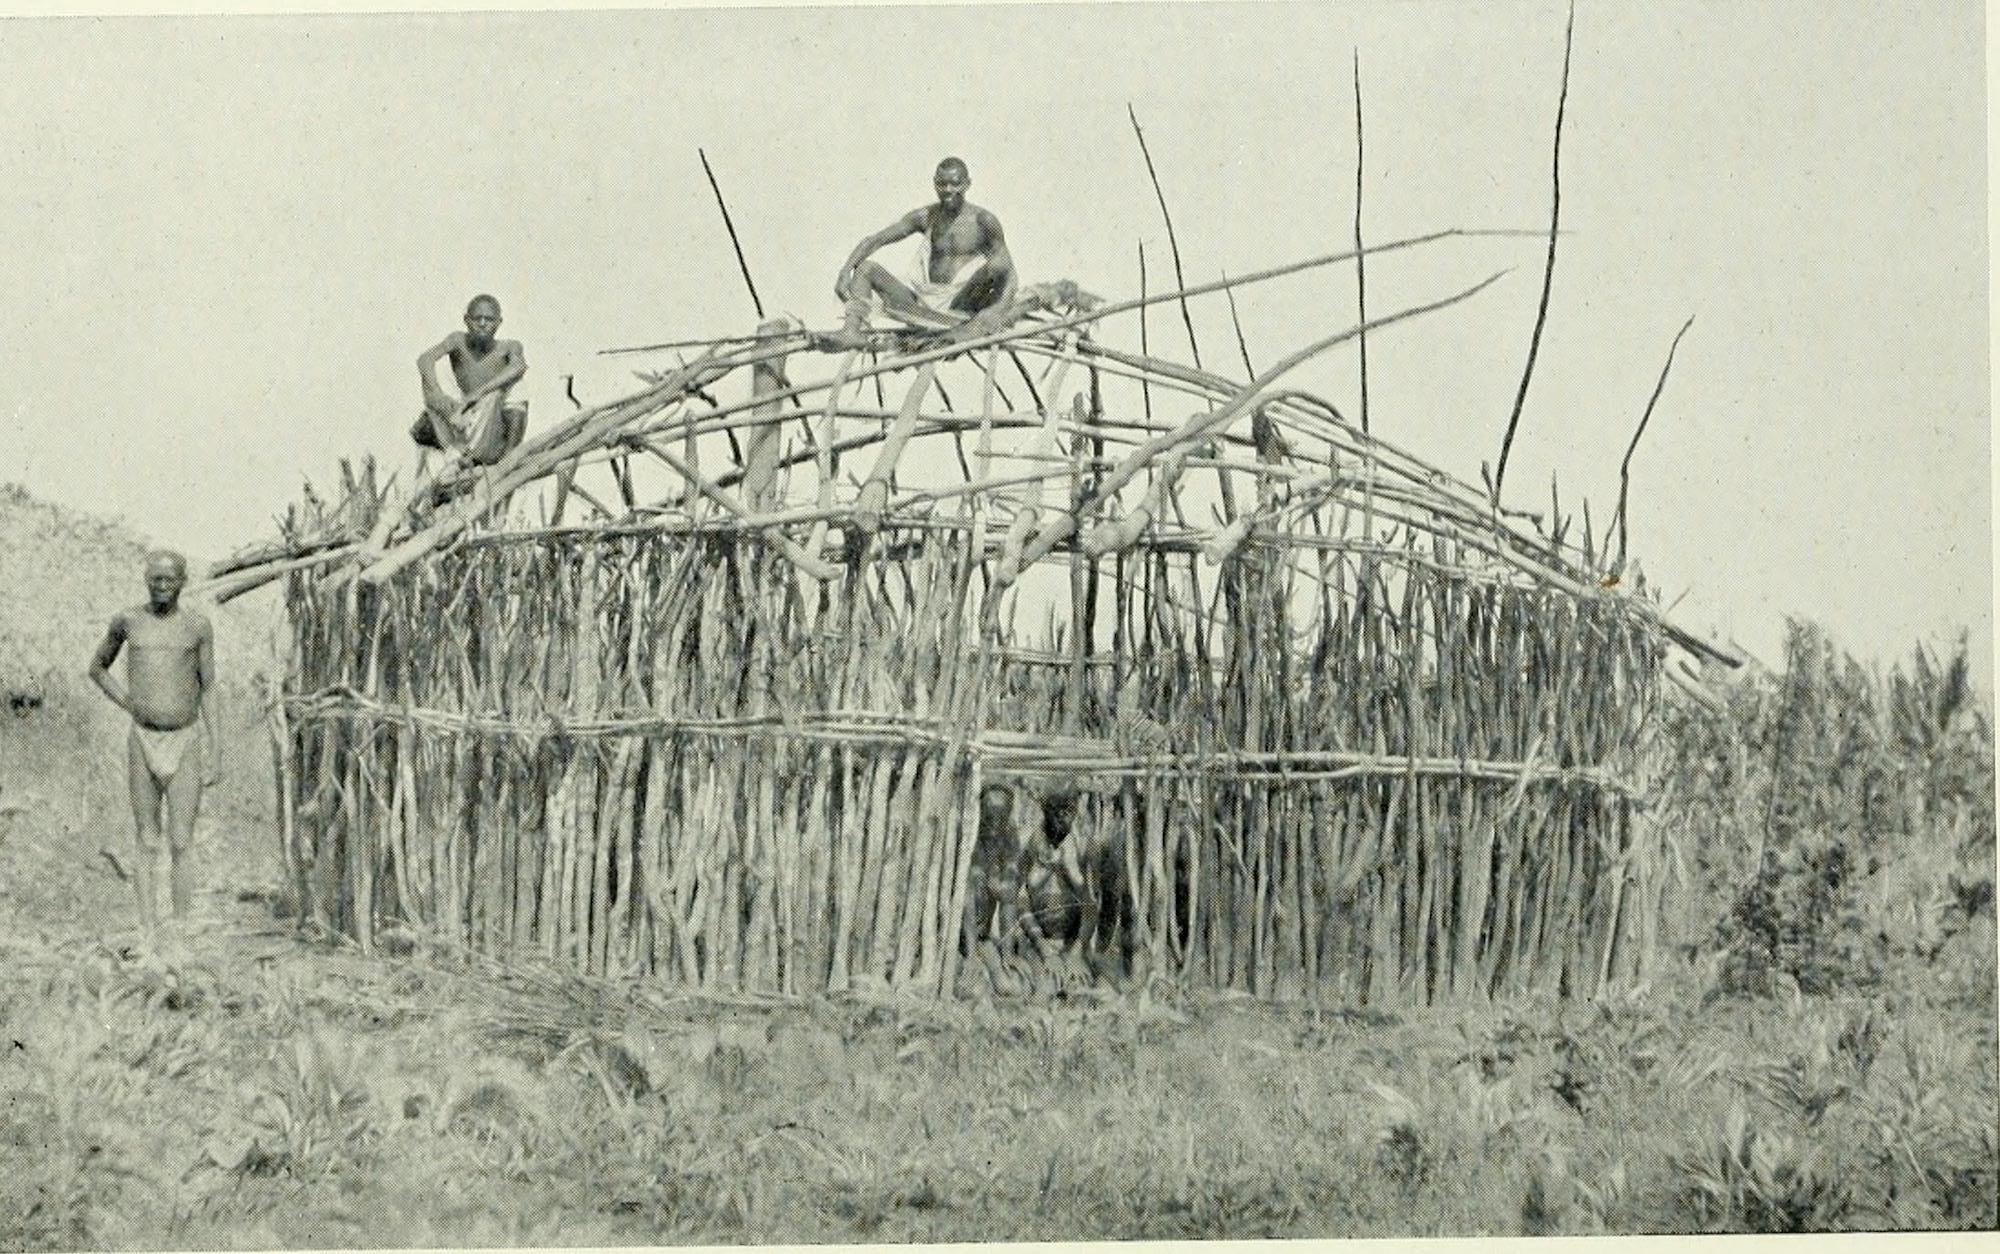 Black and white photo of men sitting on wooden house framing